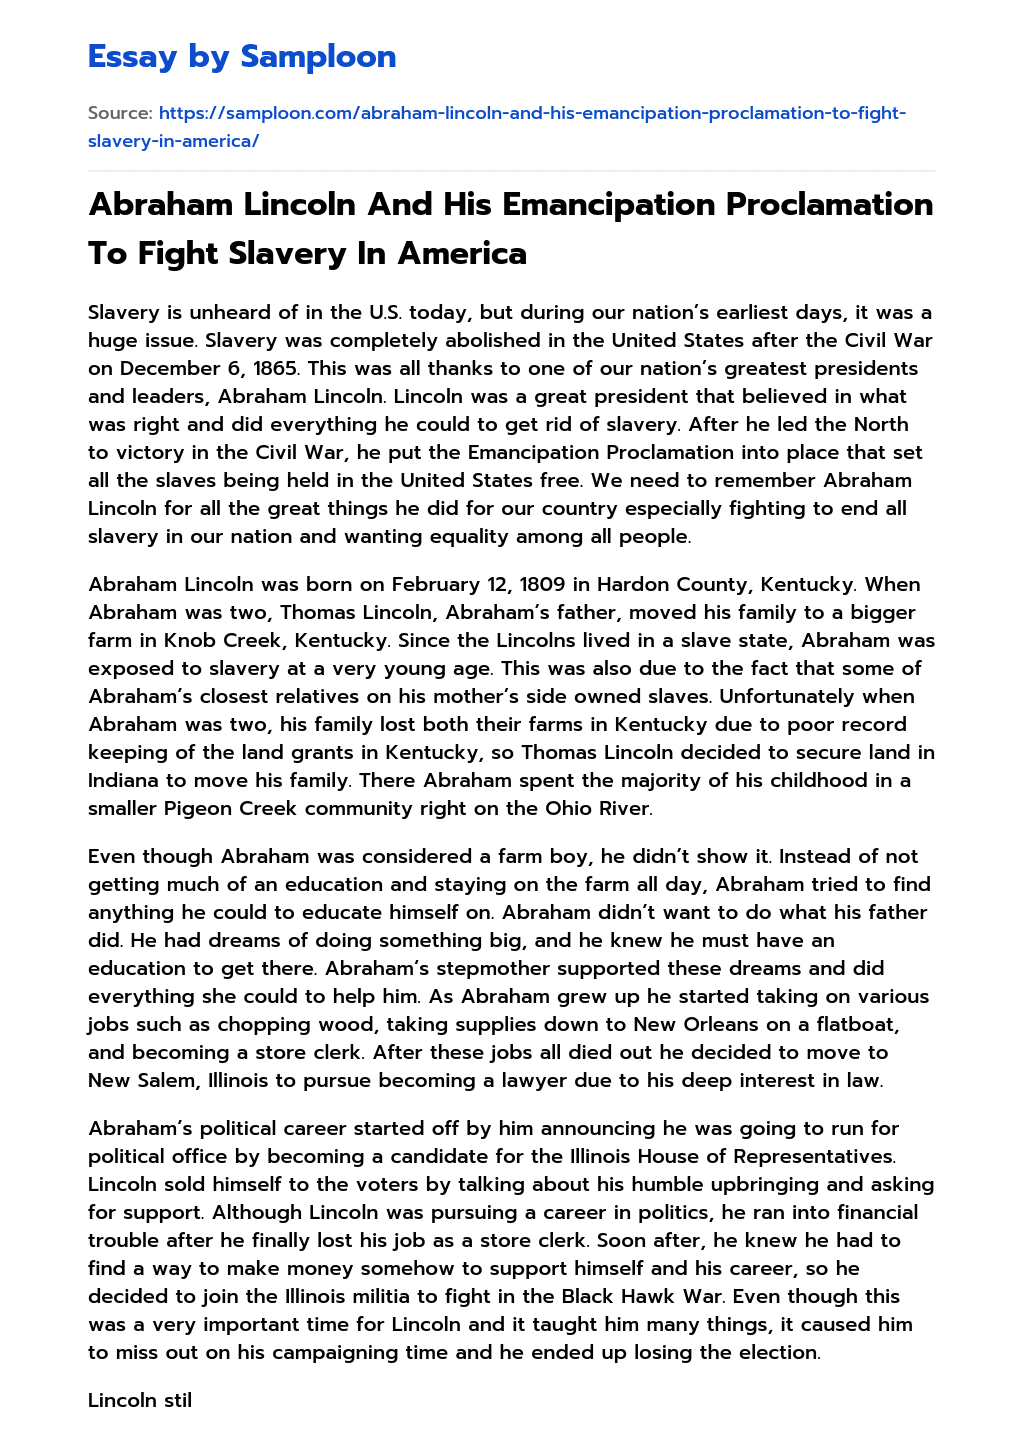 Abraham Lincoln And His Emancipation Proclamation To Fight Slavery In America Accomplishment Essay essay